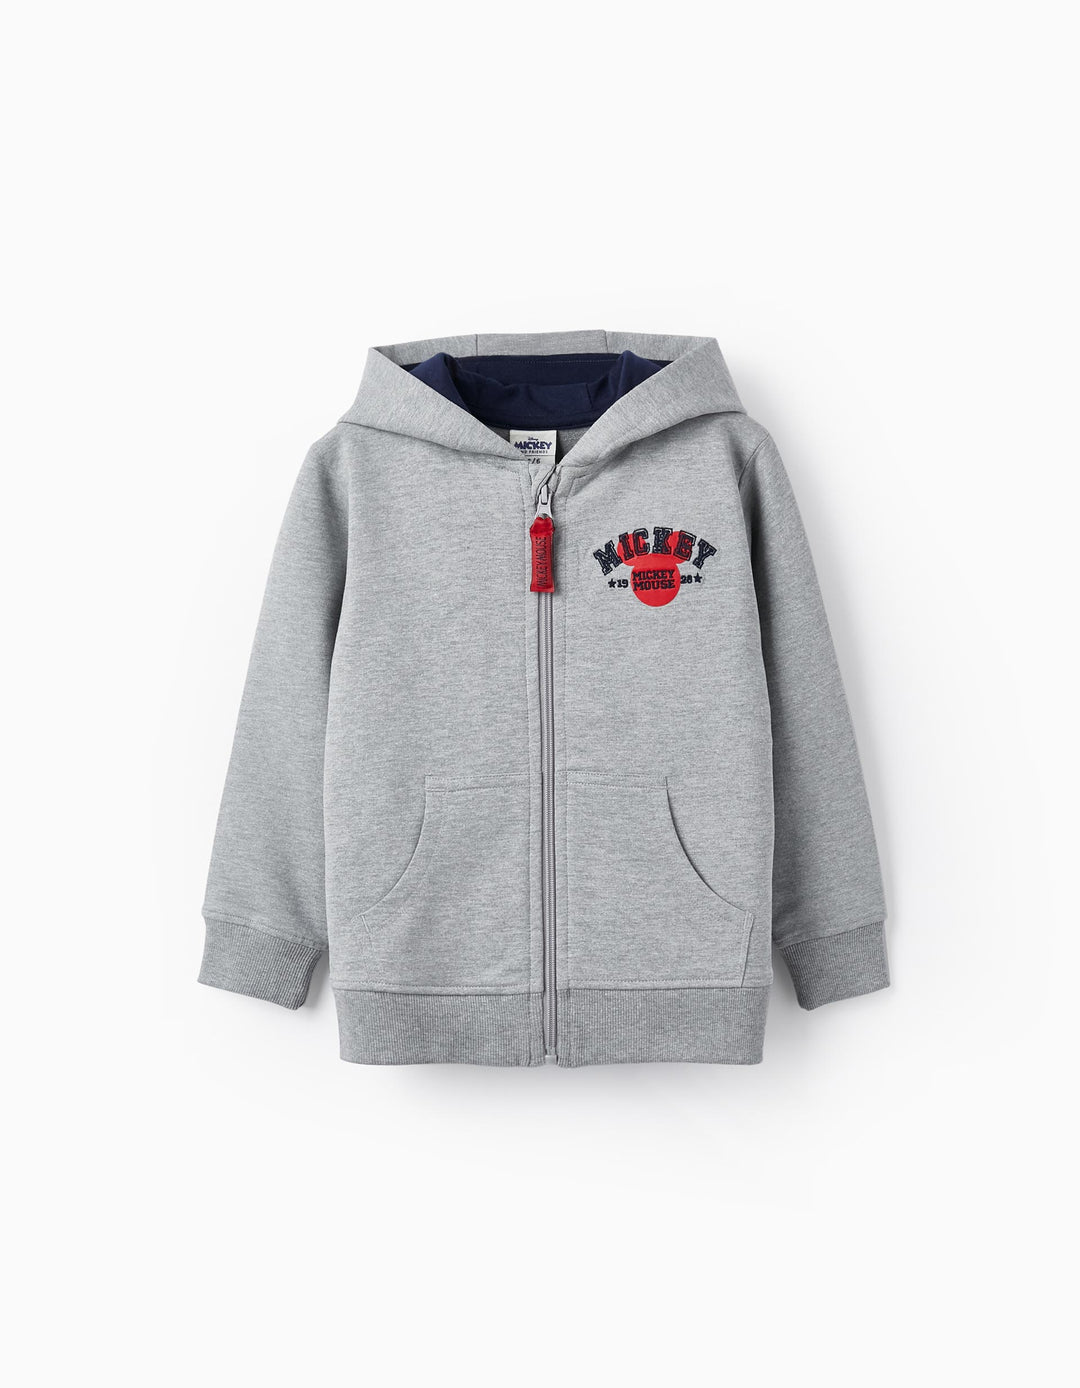 Cotton Hooded Jacket for Boys 'Mickey', Grey